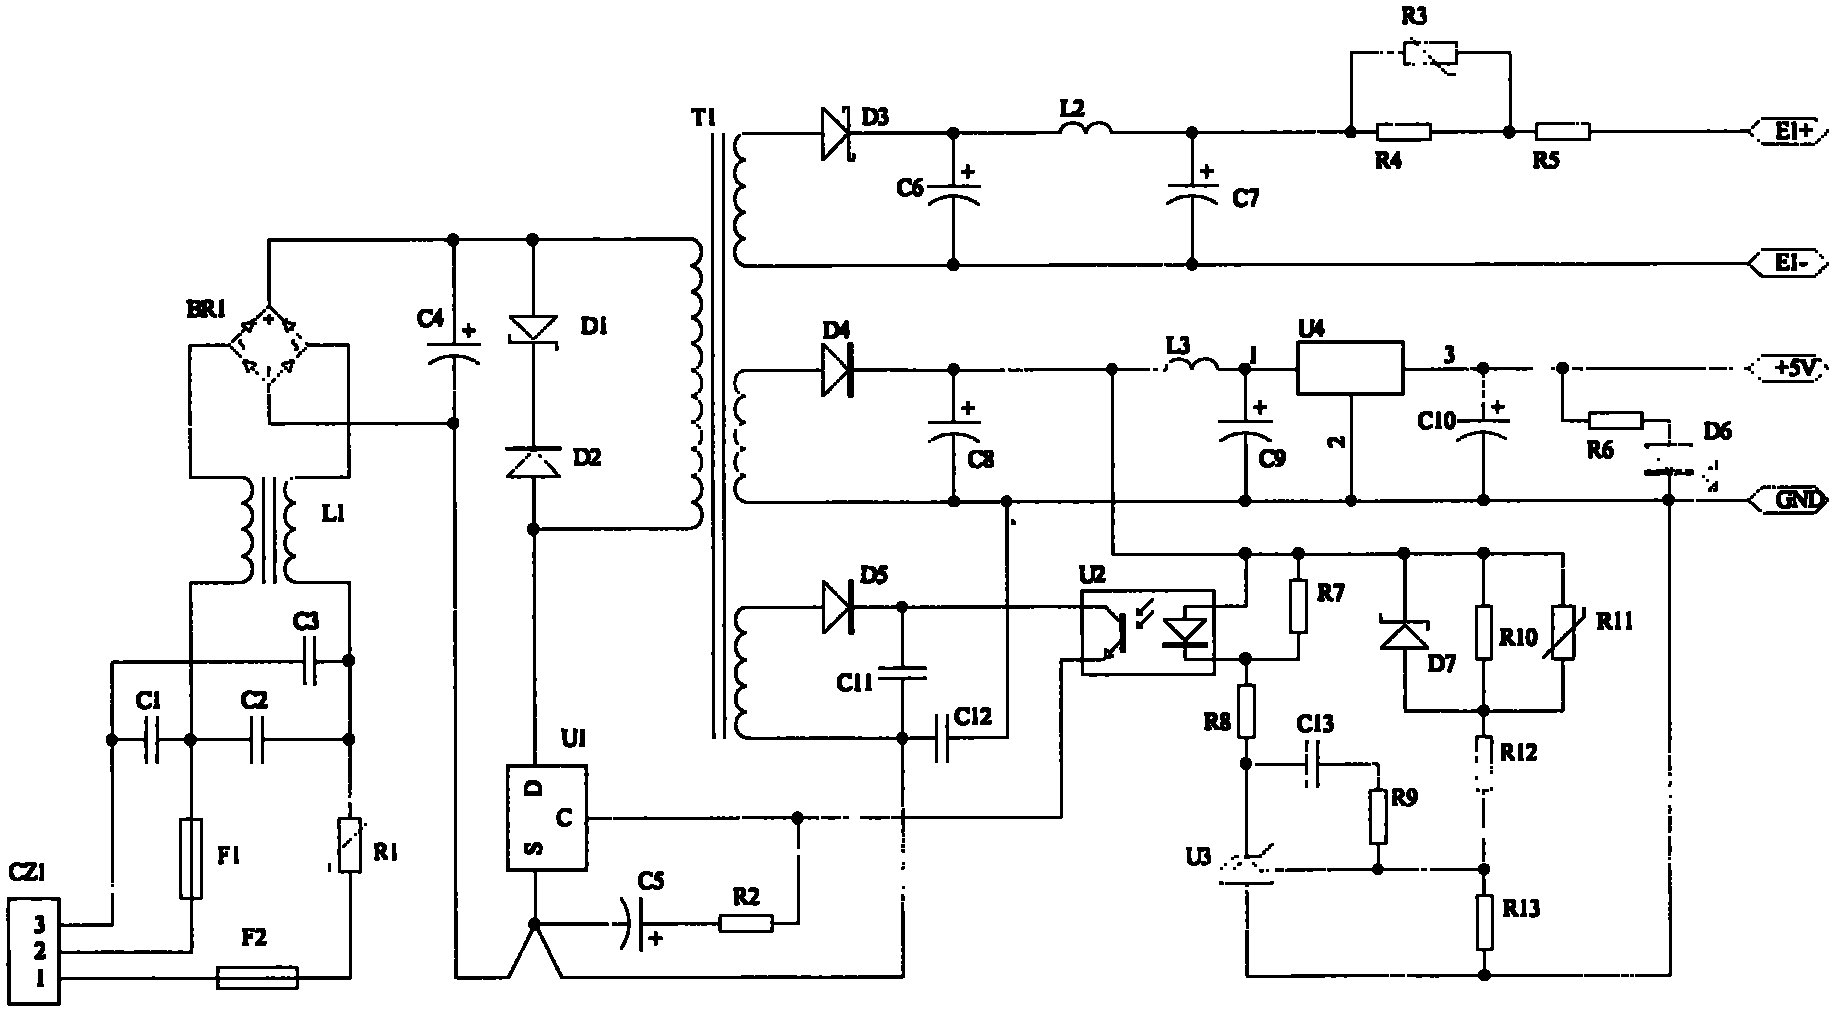 Trigger power supply capable of following temperature characteristic of thyristor